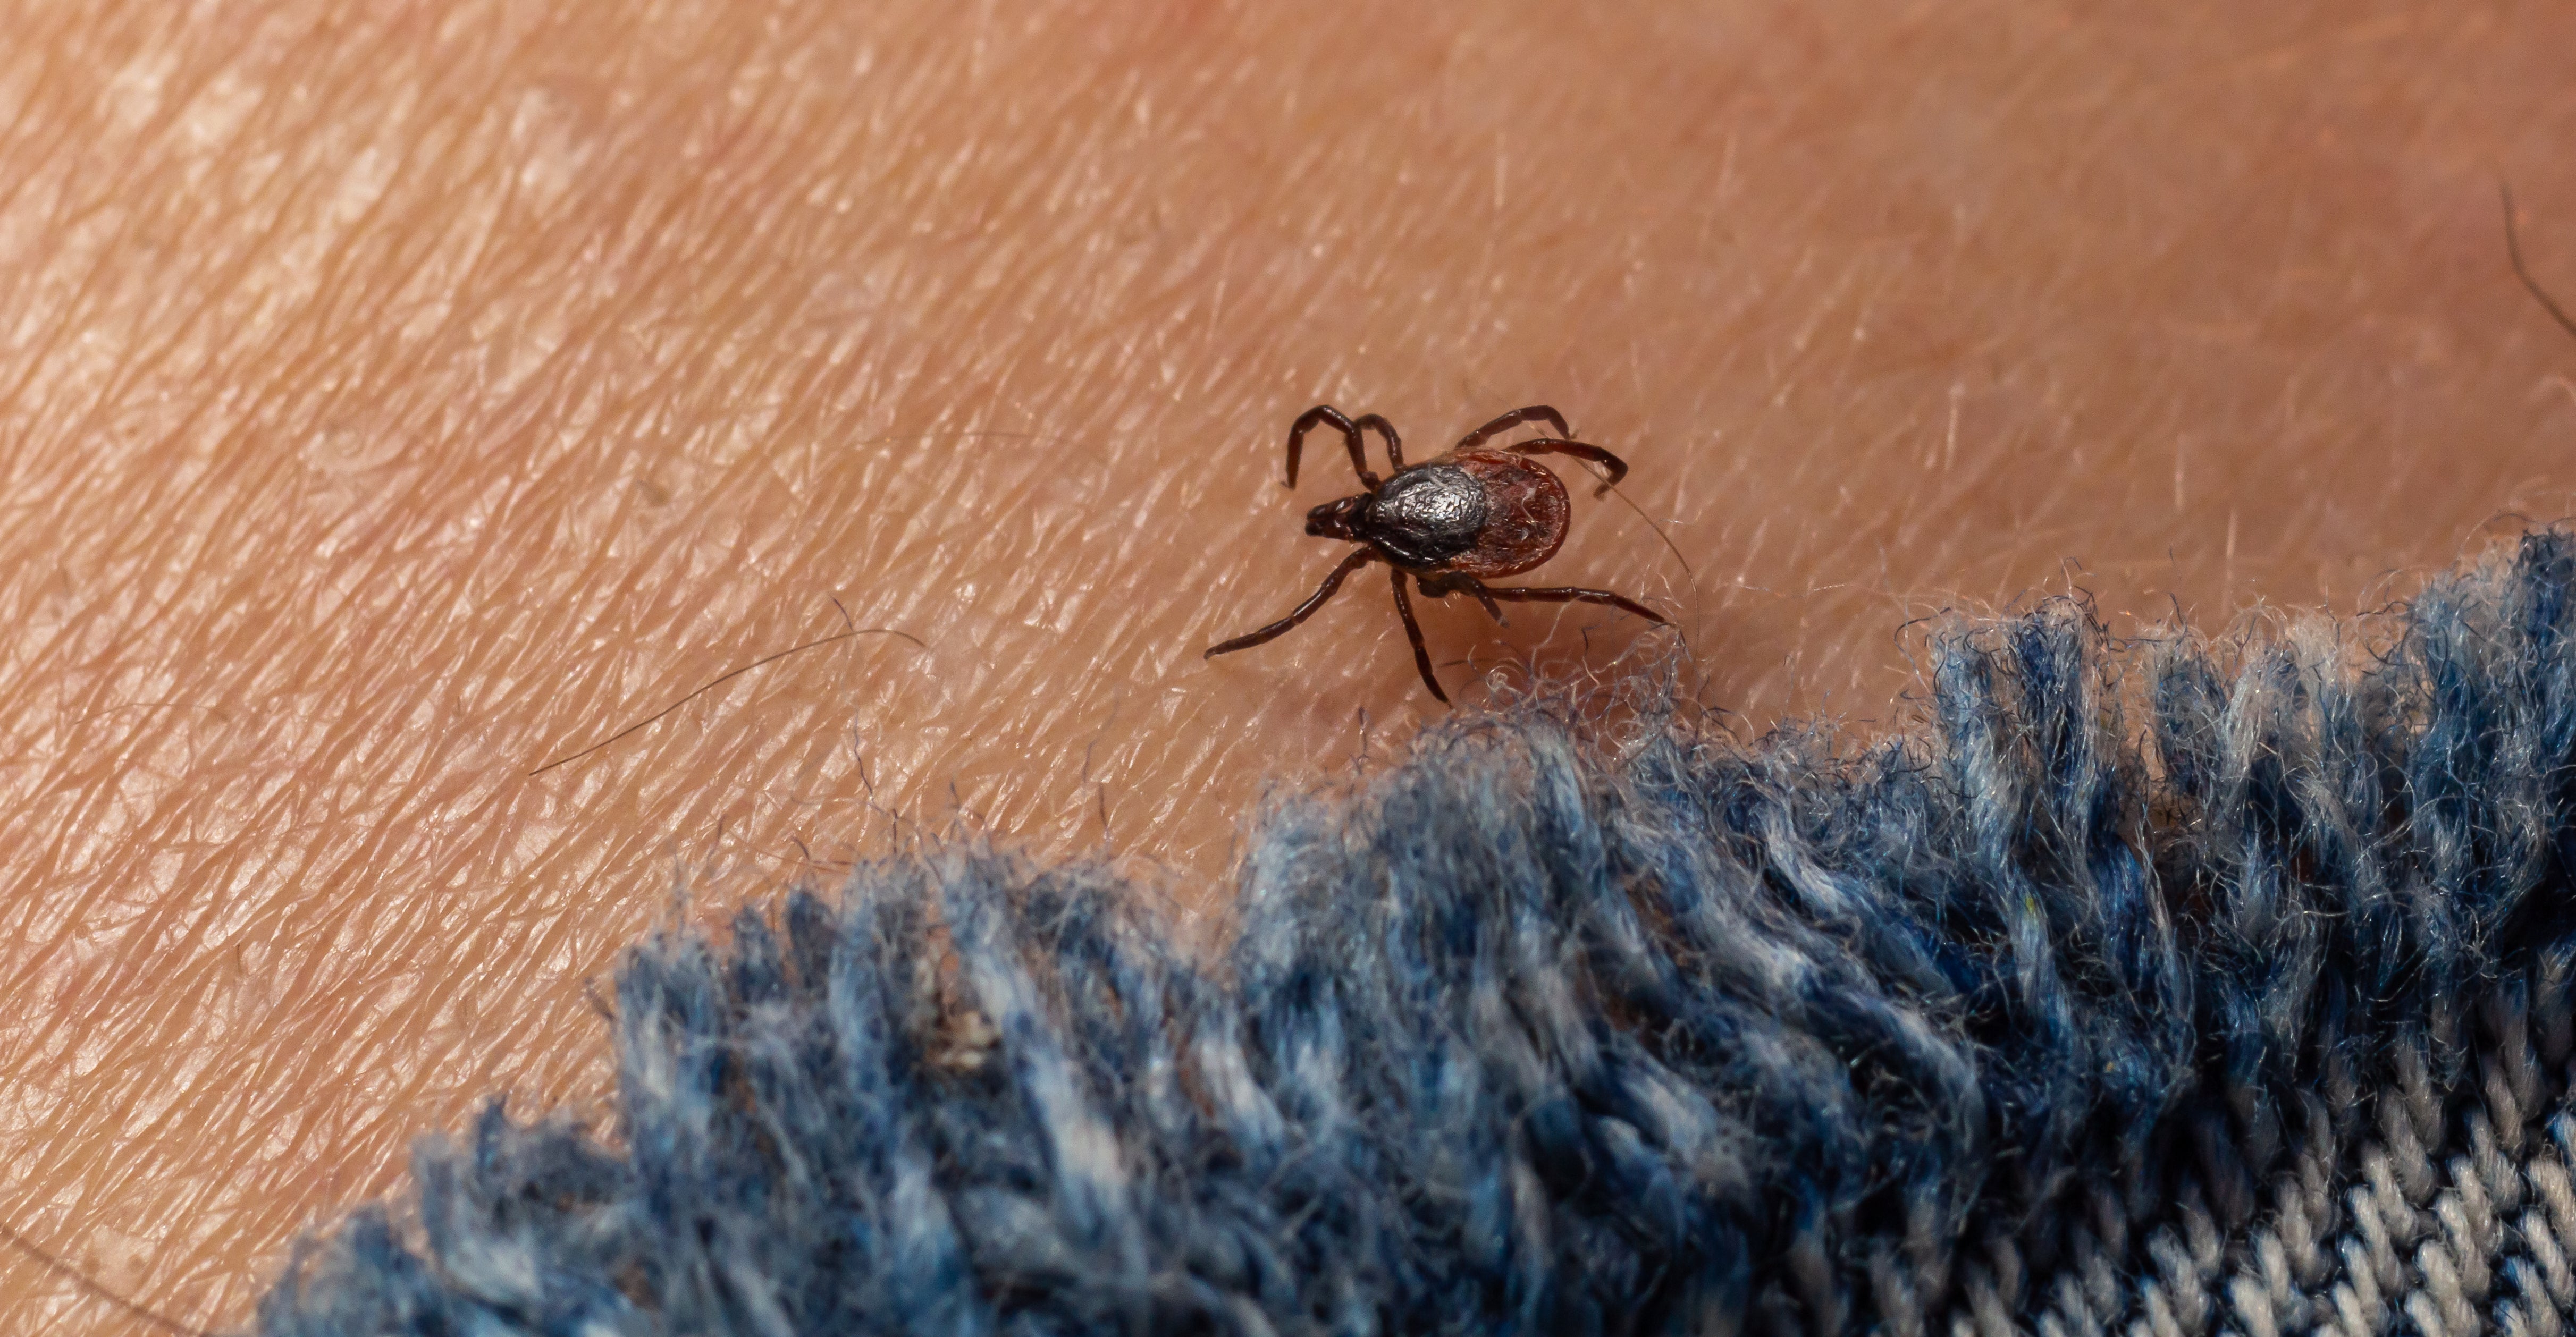 Tick-borne encephalitis is “likely” to be present in the UK, health officials have said